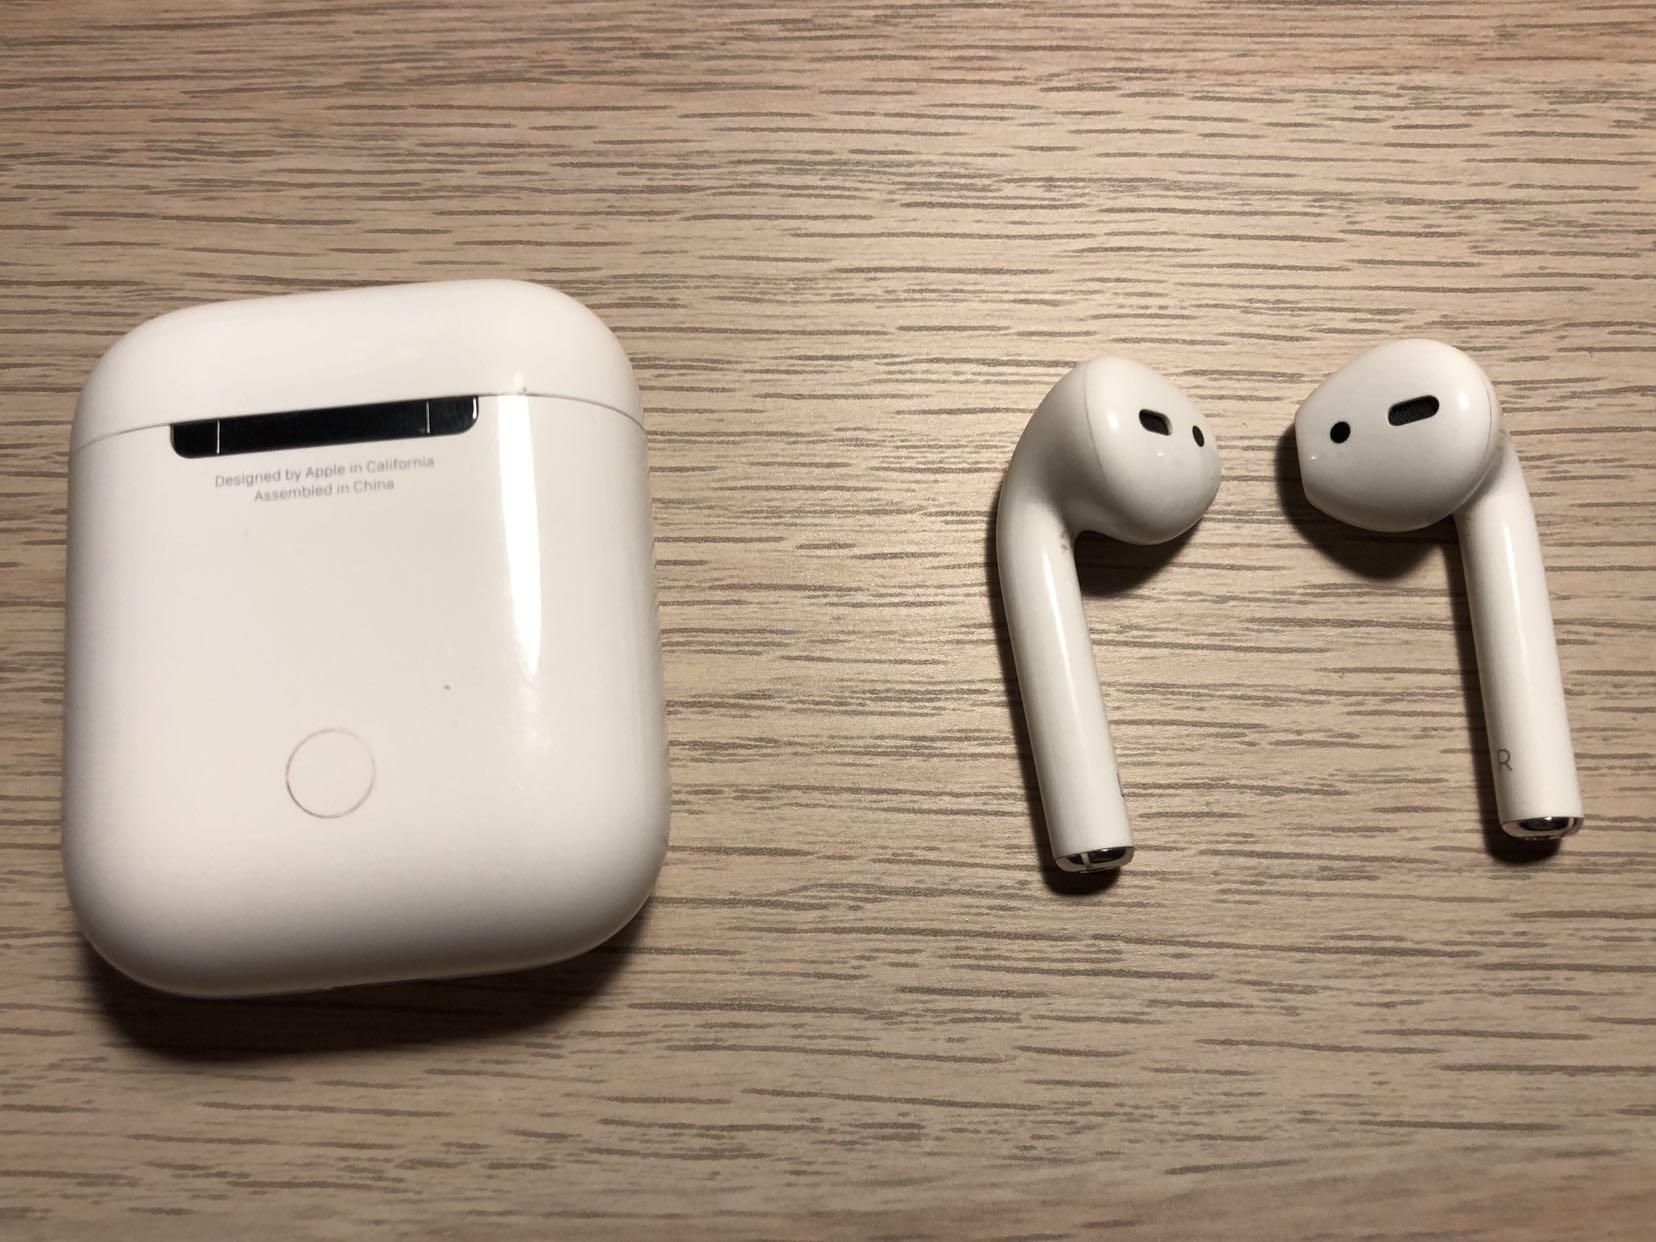 Левый наушники airpods 3. Правый наушник Apple AIRPODS 2. Air pods 1 оригинал. Apple AIRPODS Pro 2nd Generation. AIRPODS 1st Generation.